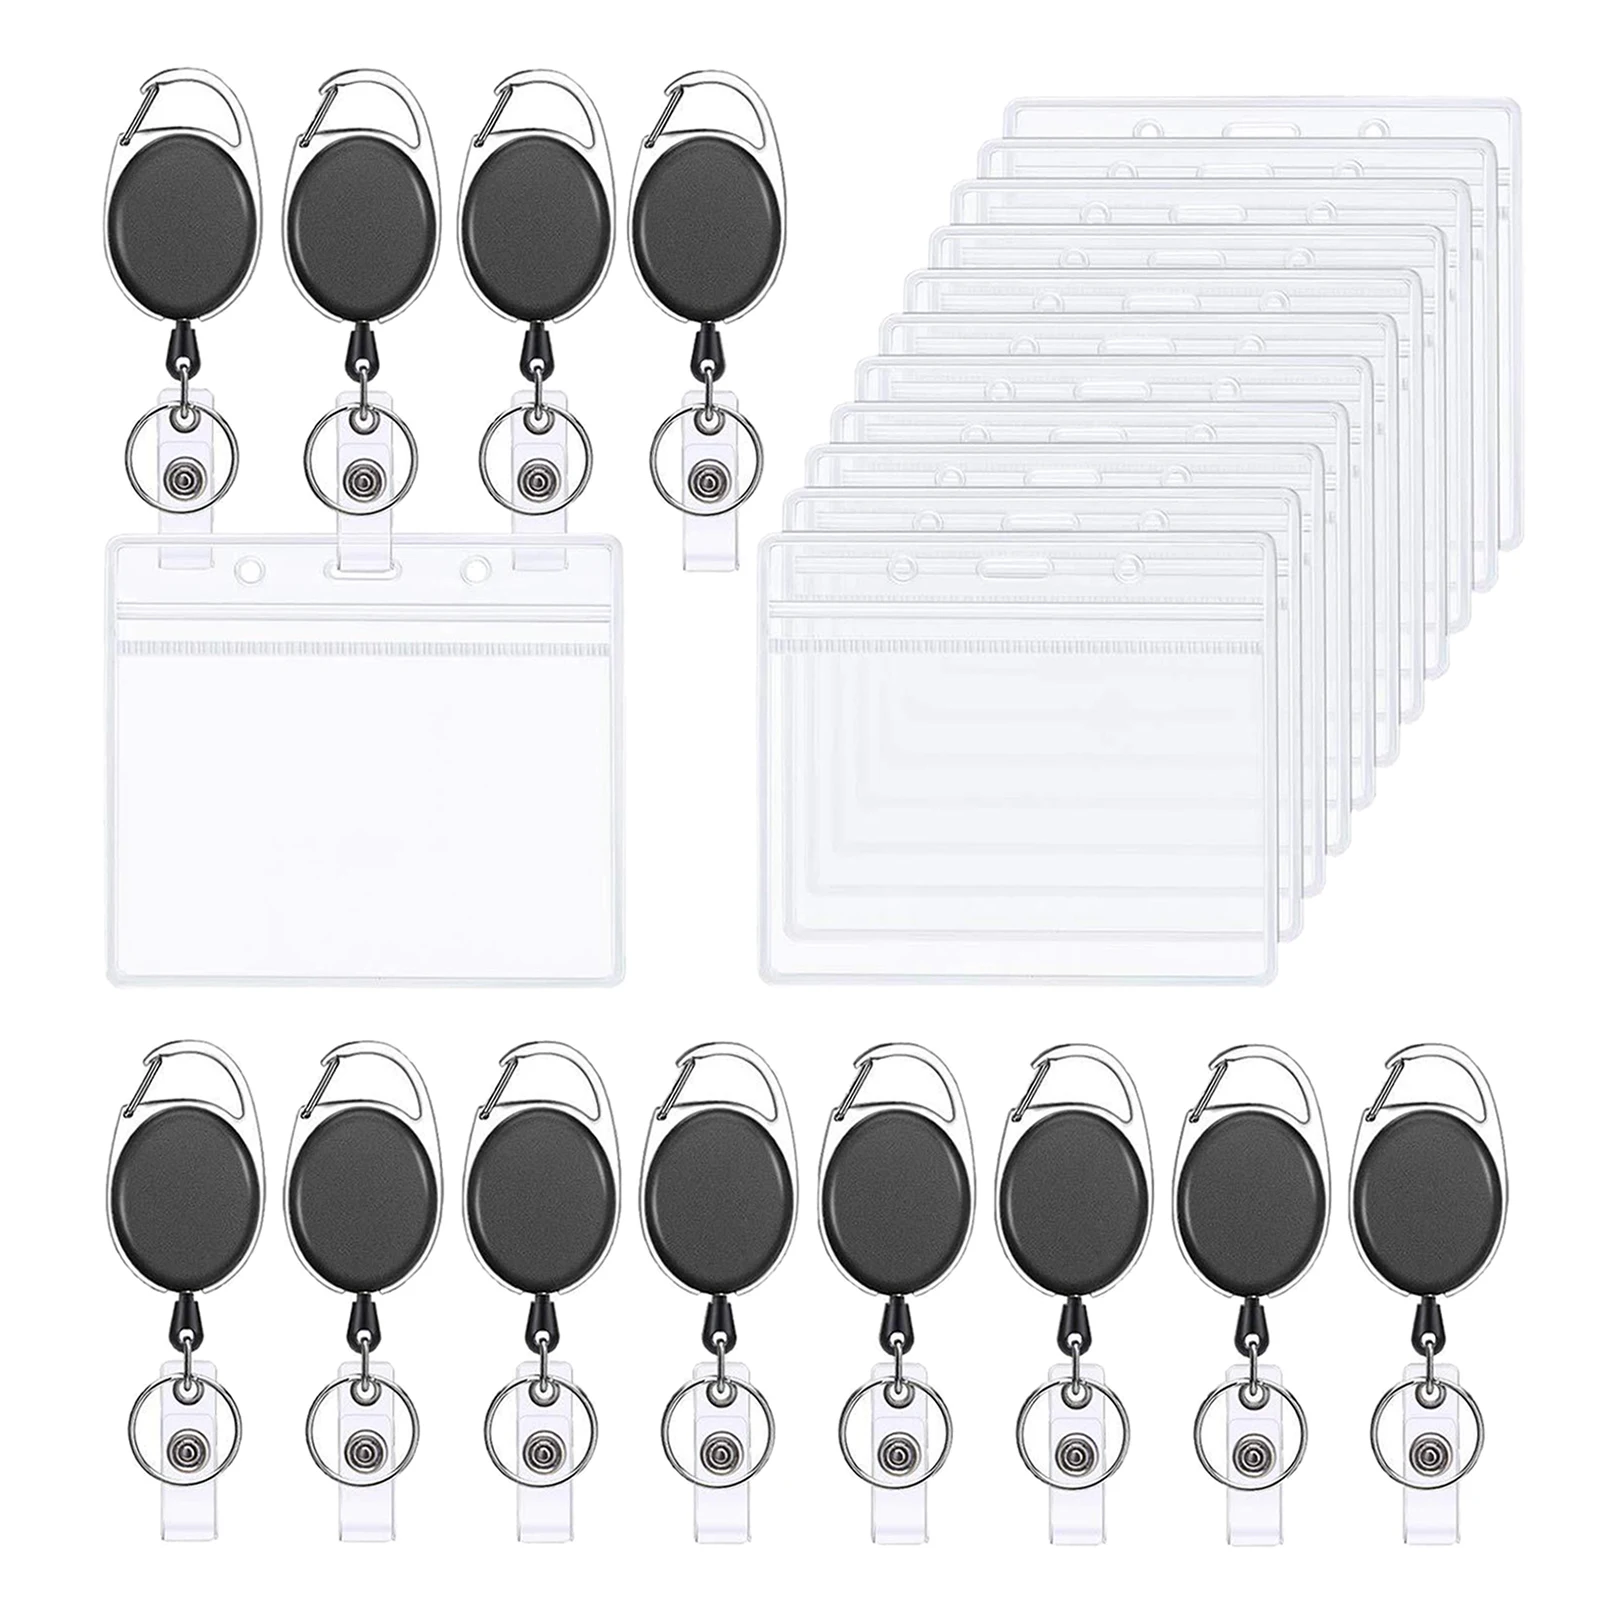 12 PCS Black Retractable Badge Reel w/ Belt Clip Key Ring ID Card Holder Photo Name Tag Holders for School Students Worker